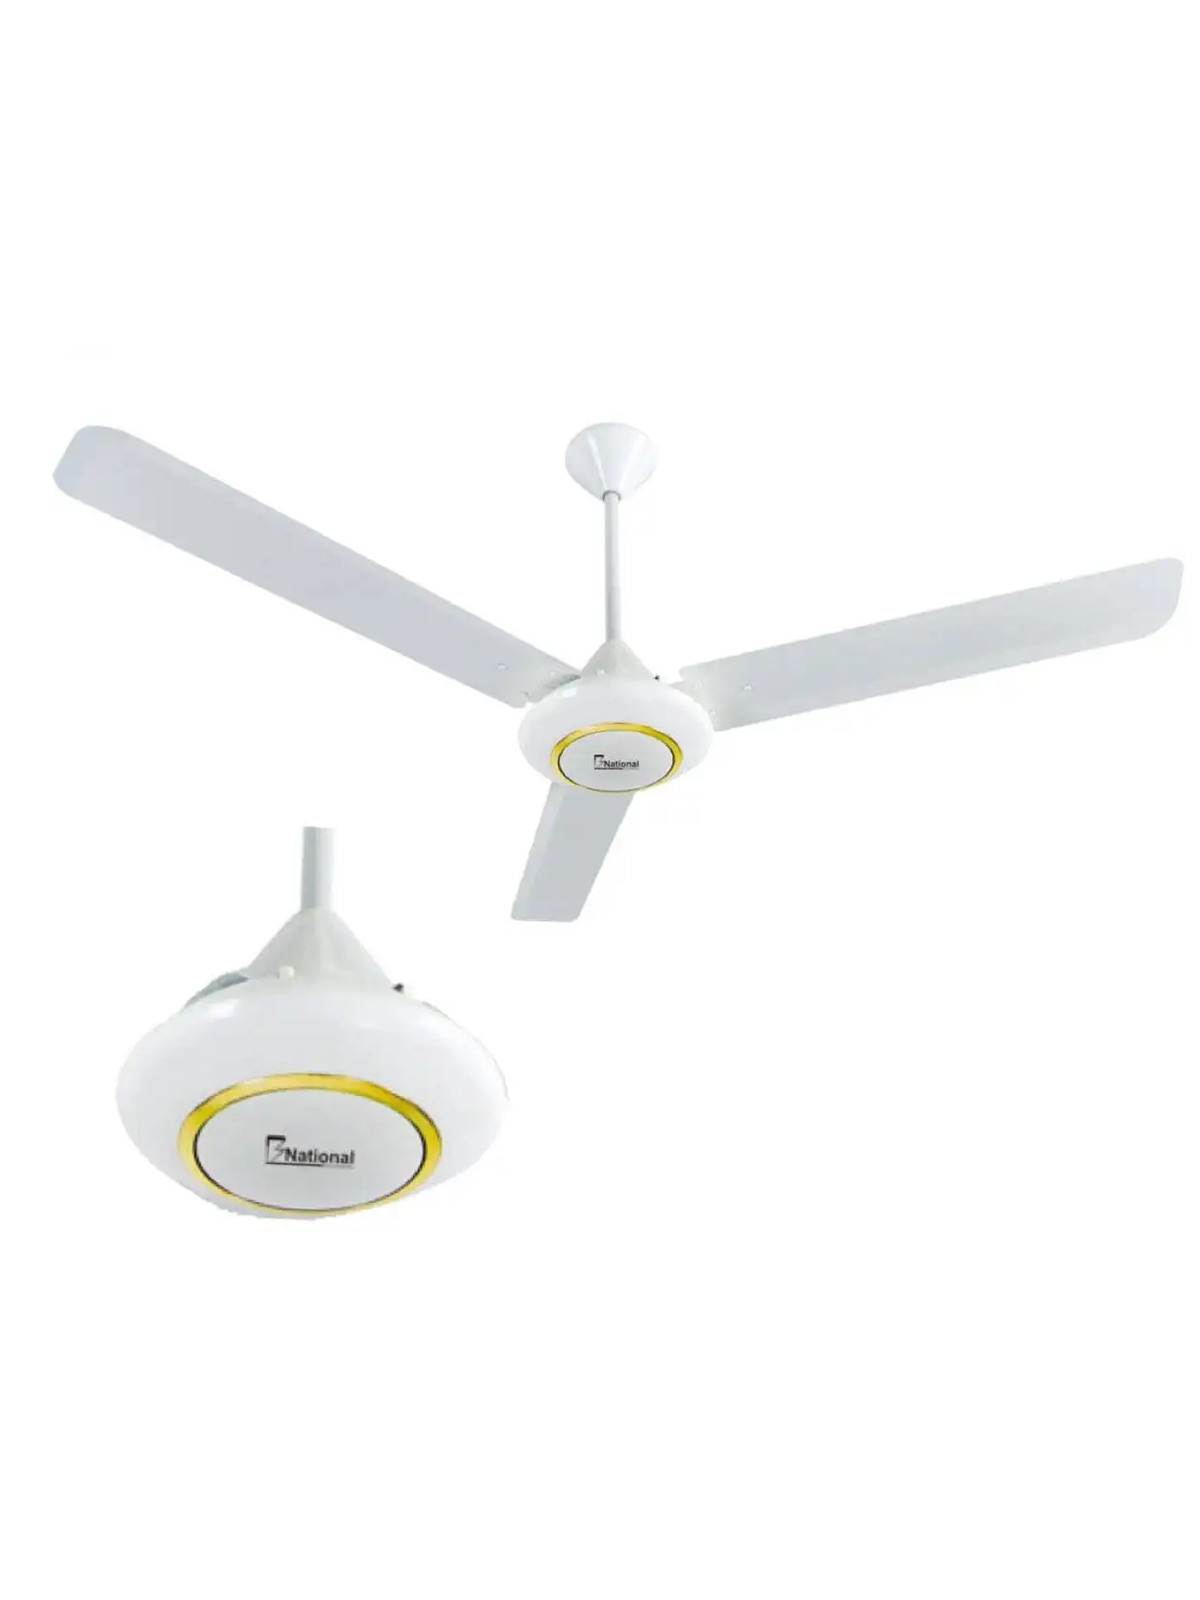 B National Ceiling fan in white color with 3 butterflies